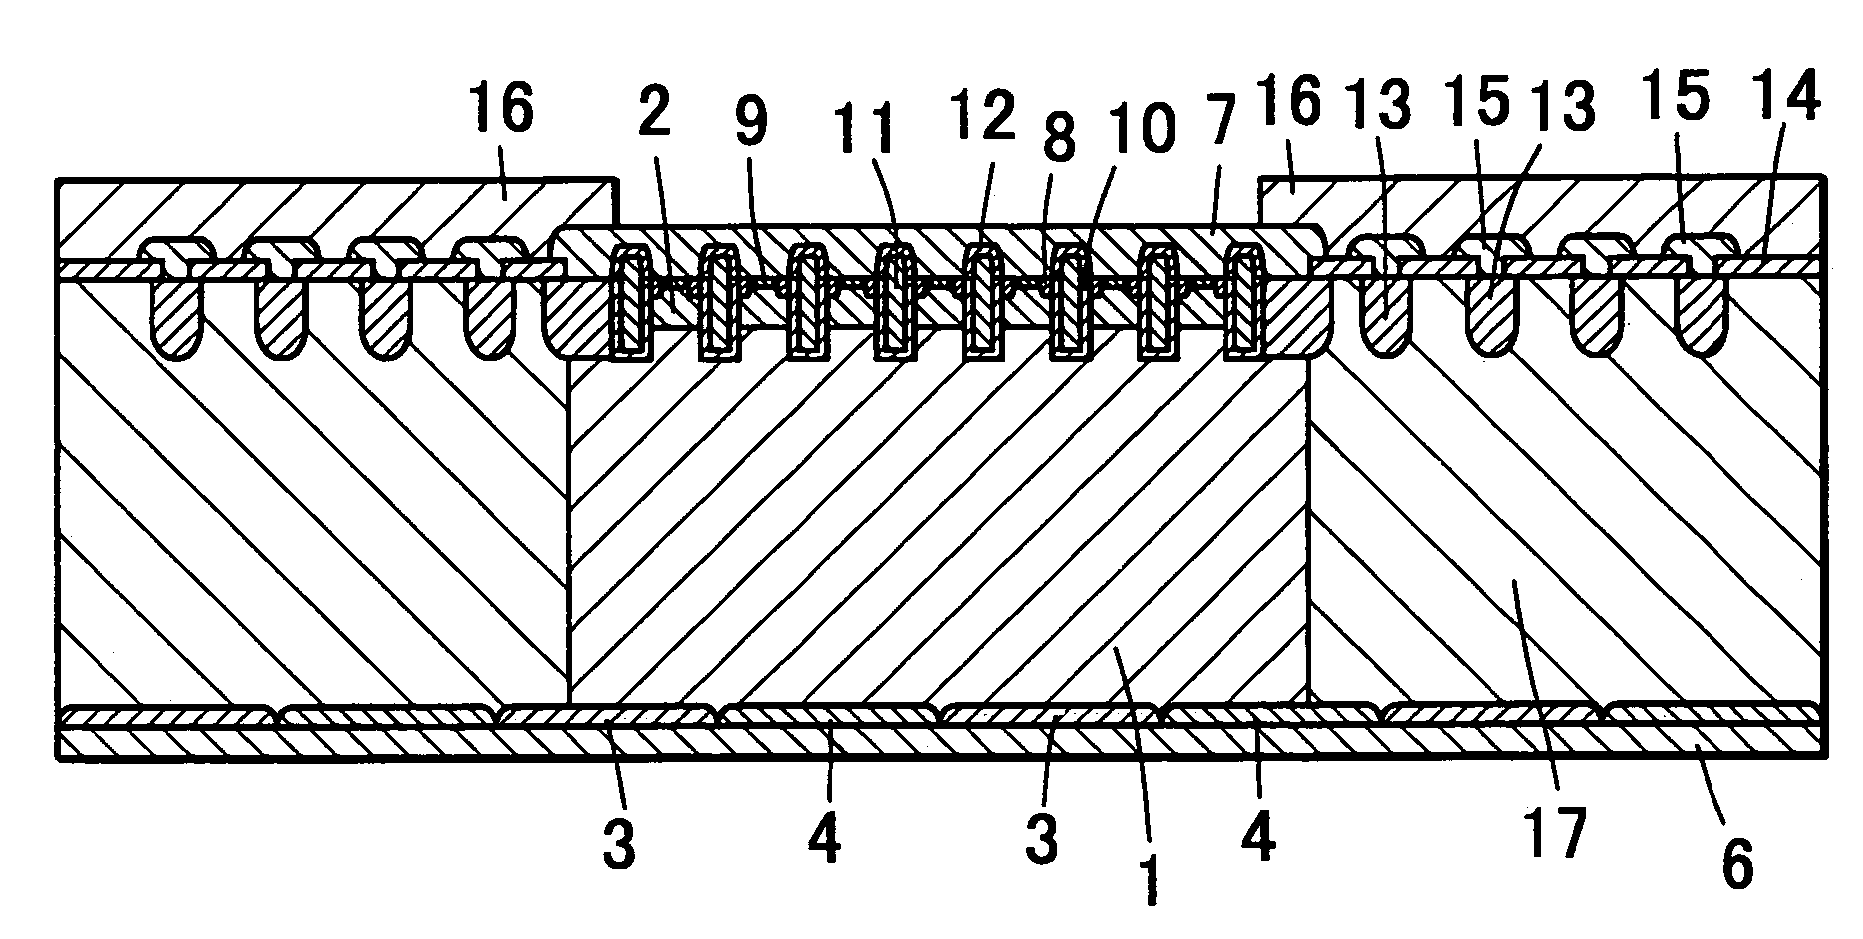 Reverse conducting semiconductor device and a fabrication method thereof